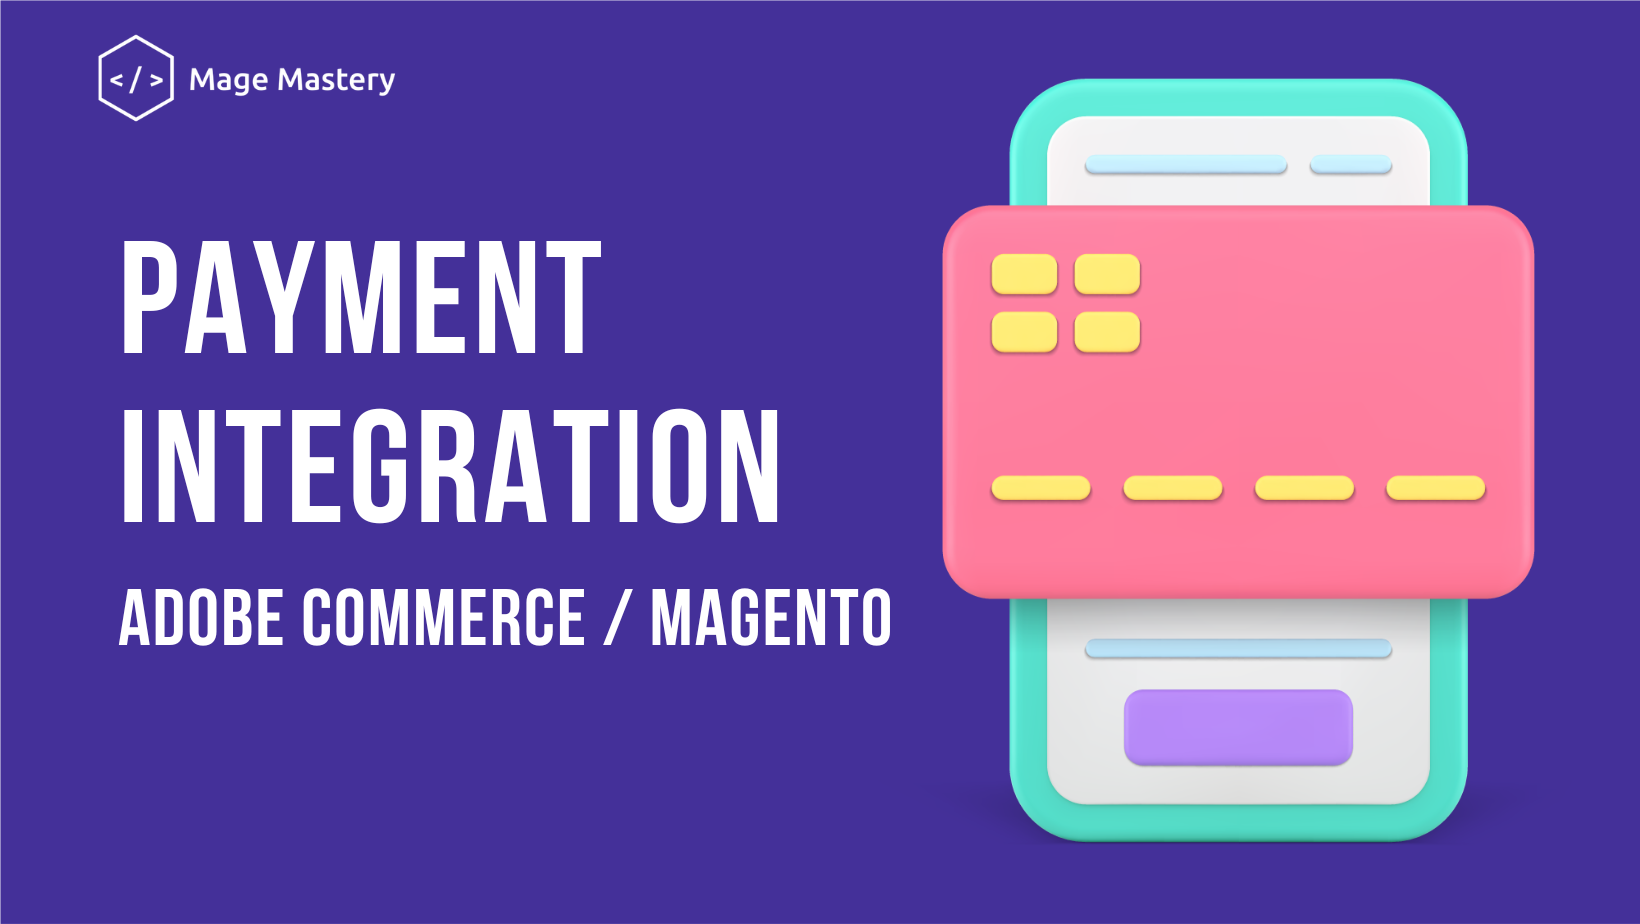 Magento 2 Payment Integration with Converge Elavon